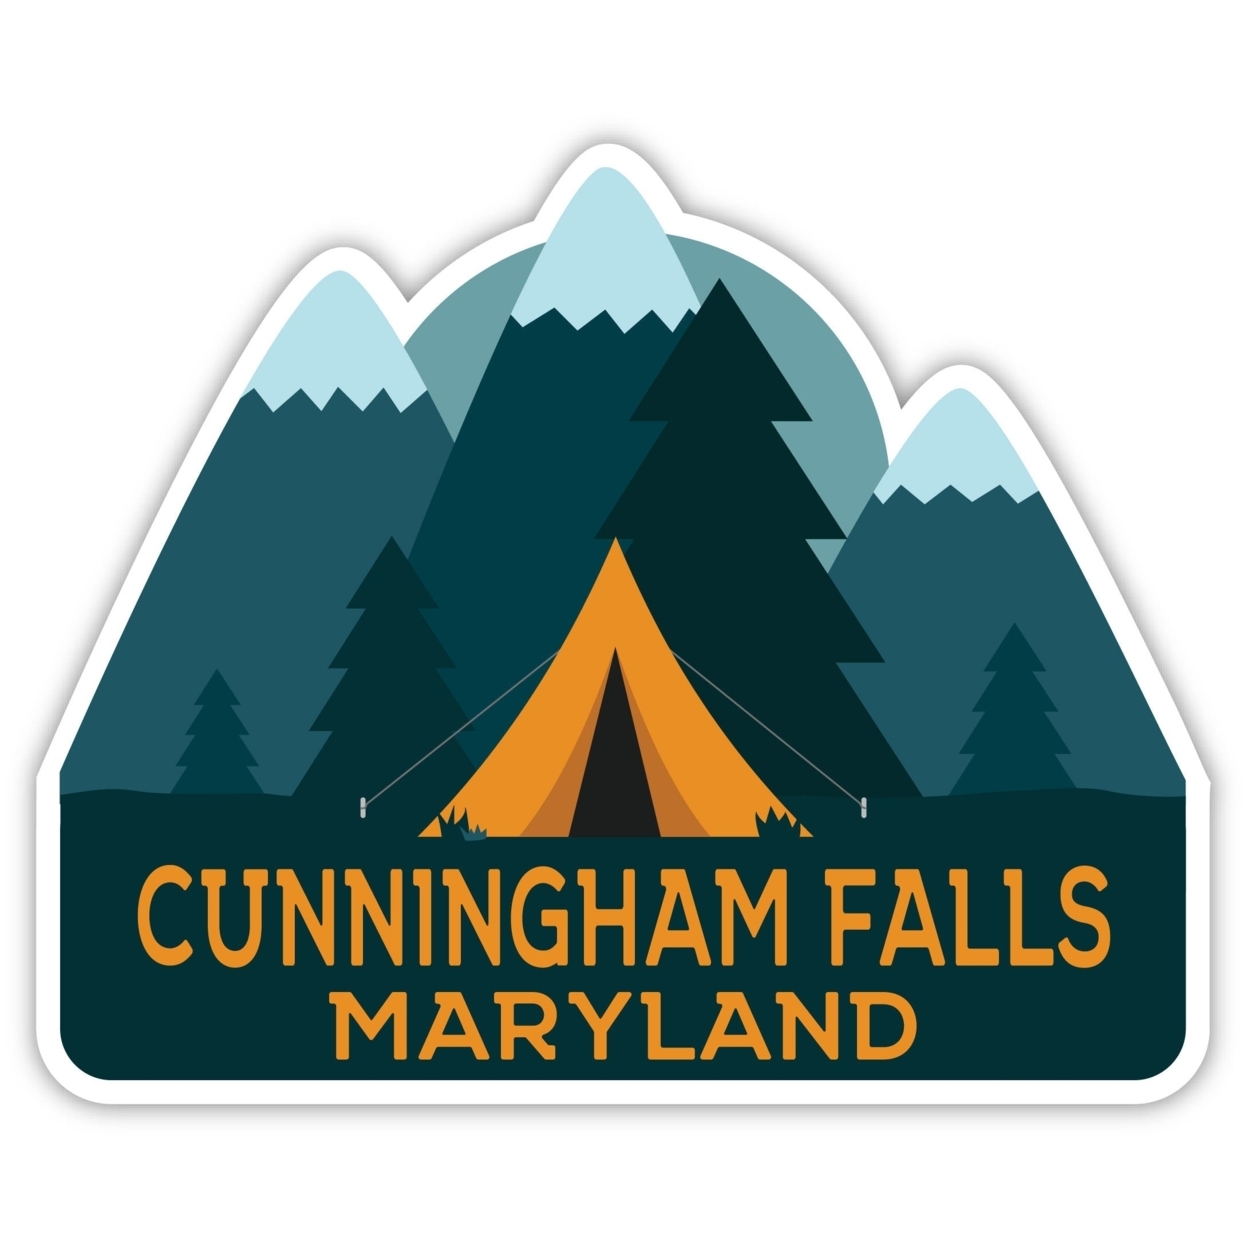 Cunningham Falls Maryland Souvenir Decorative Stickers (Choose Theme And Size) - Single Unit, 6-Inch, Tent